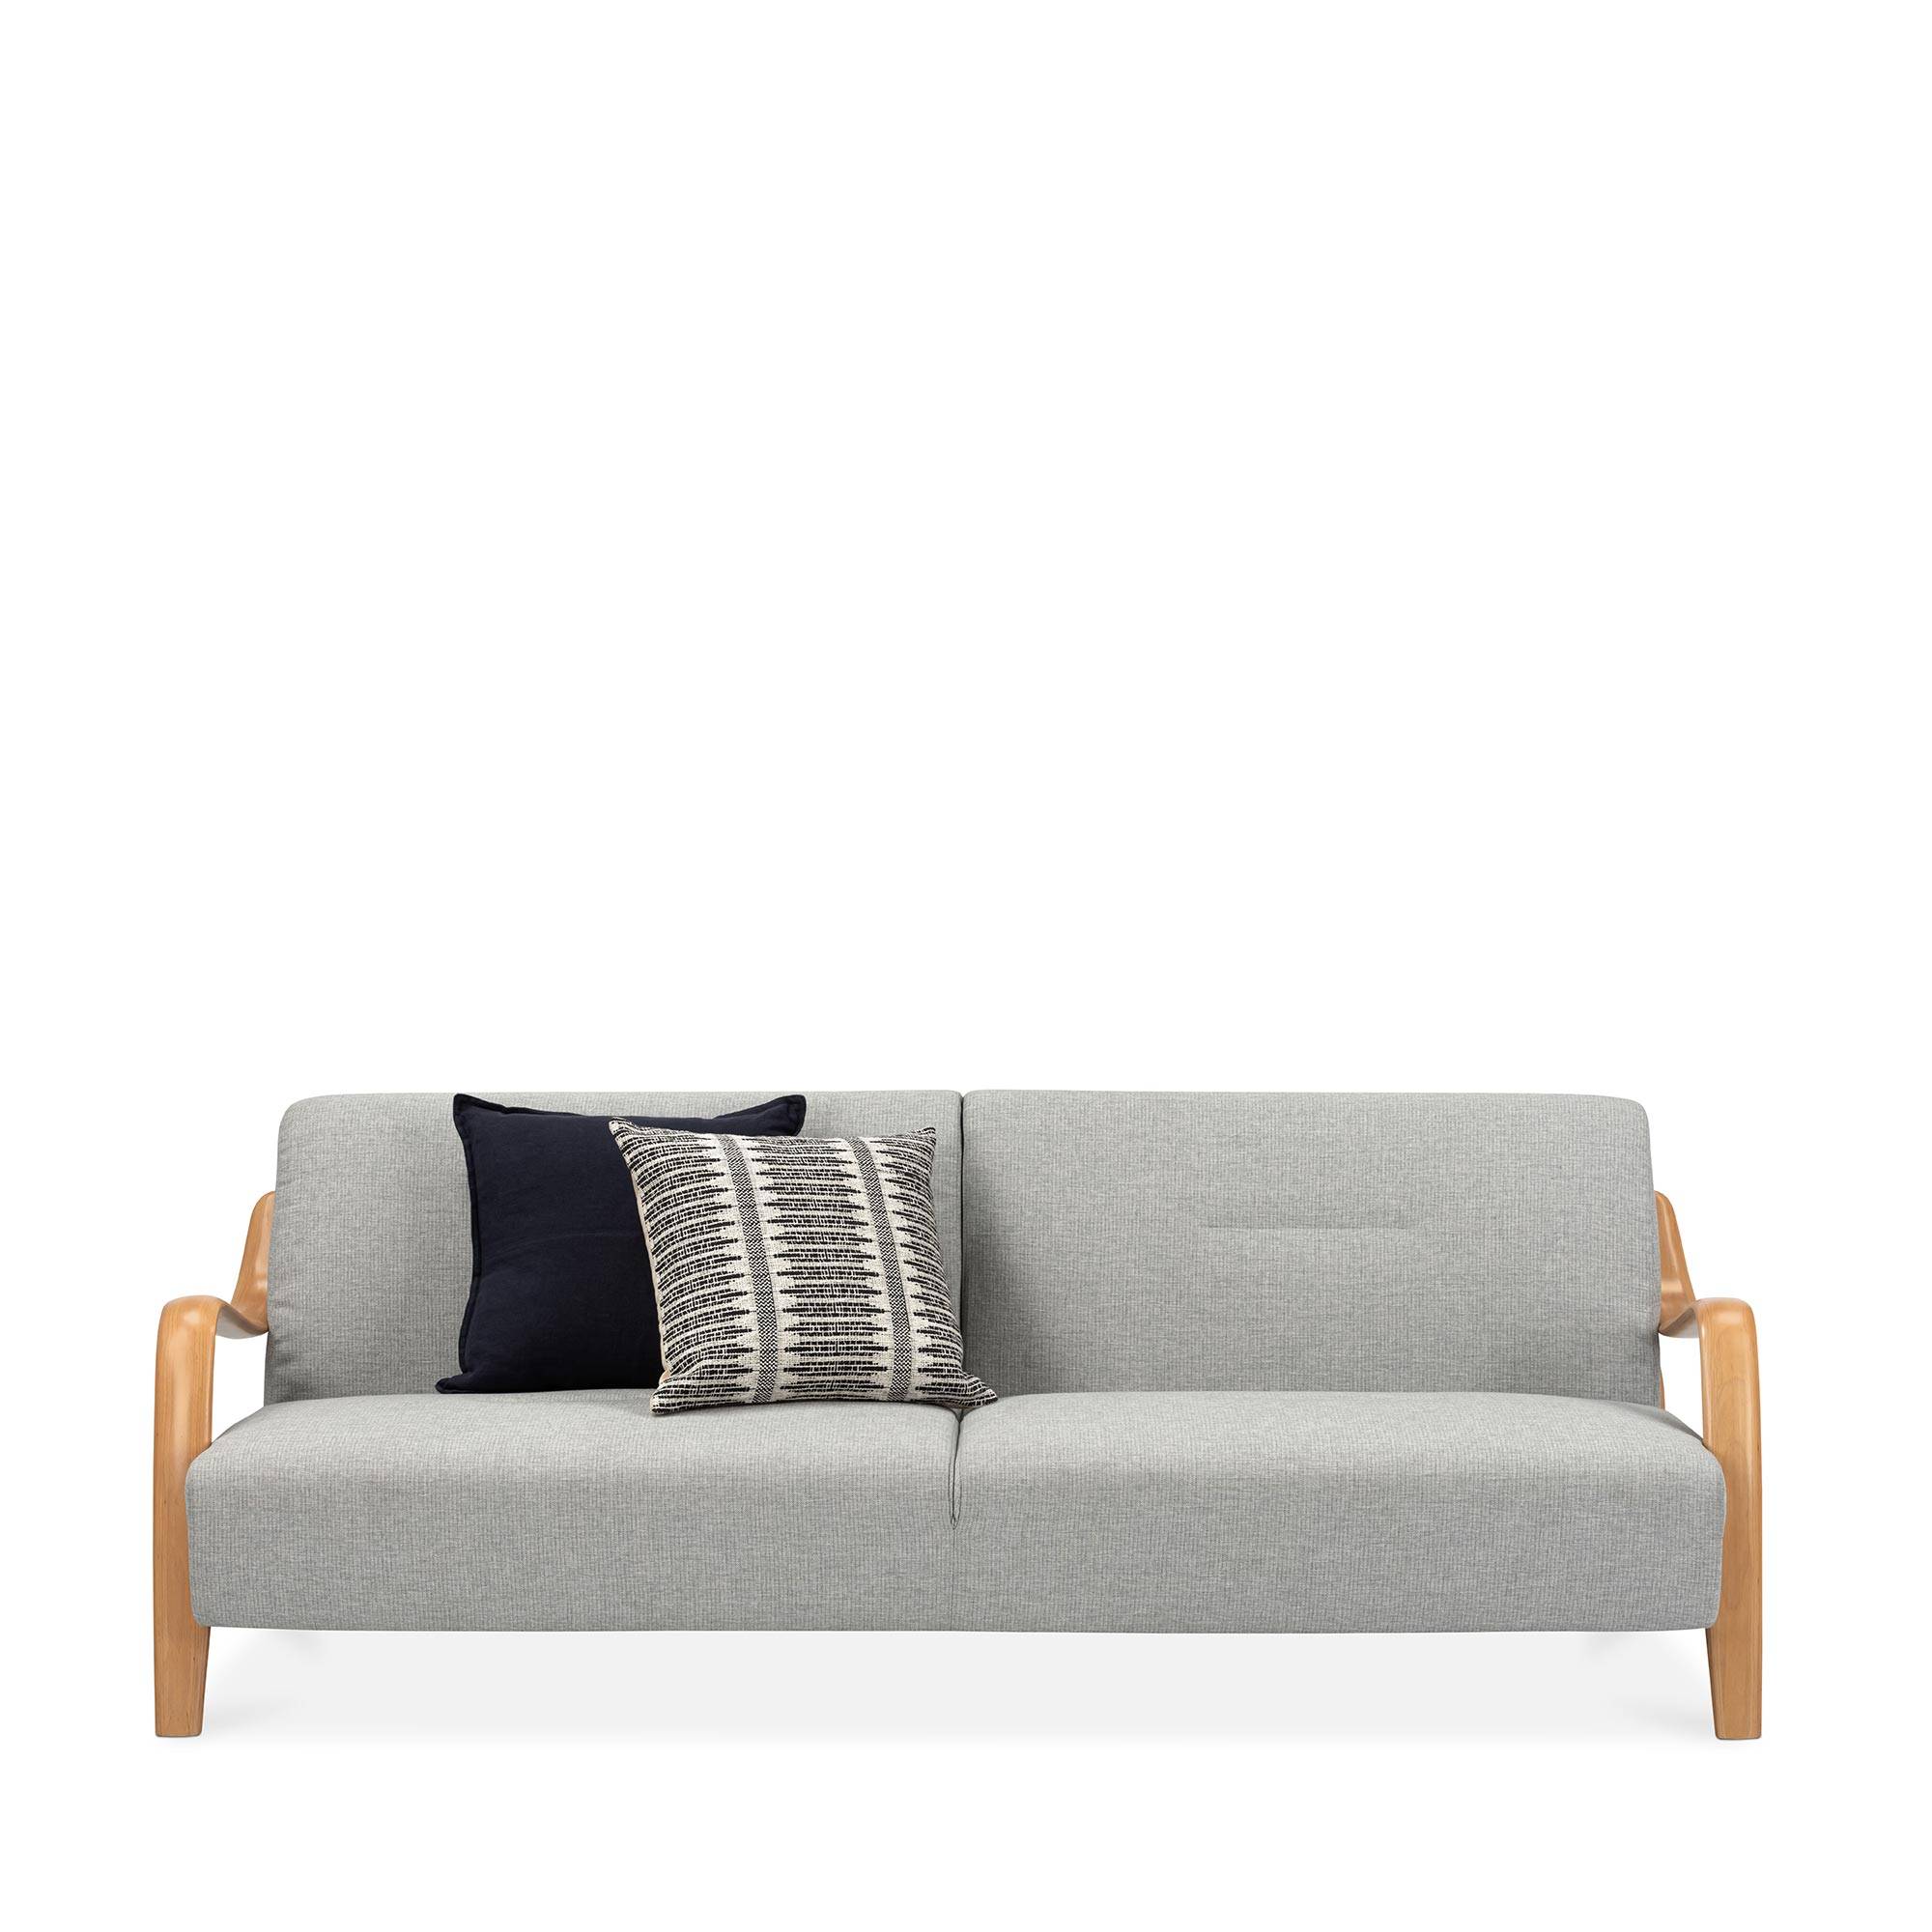 Beech range of fabric sofas made from solid beech timber